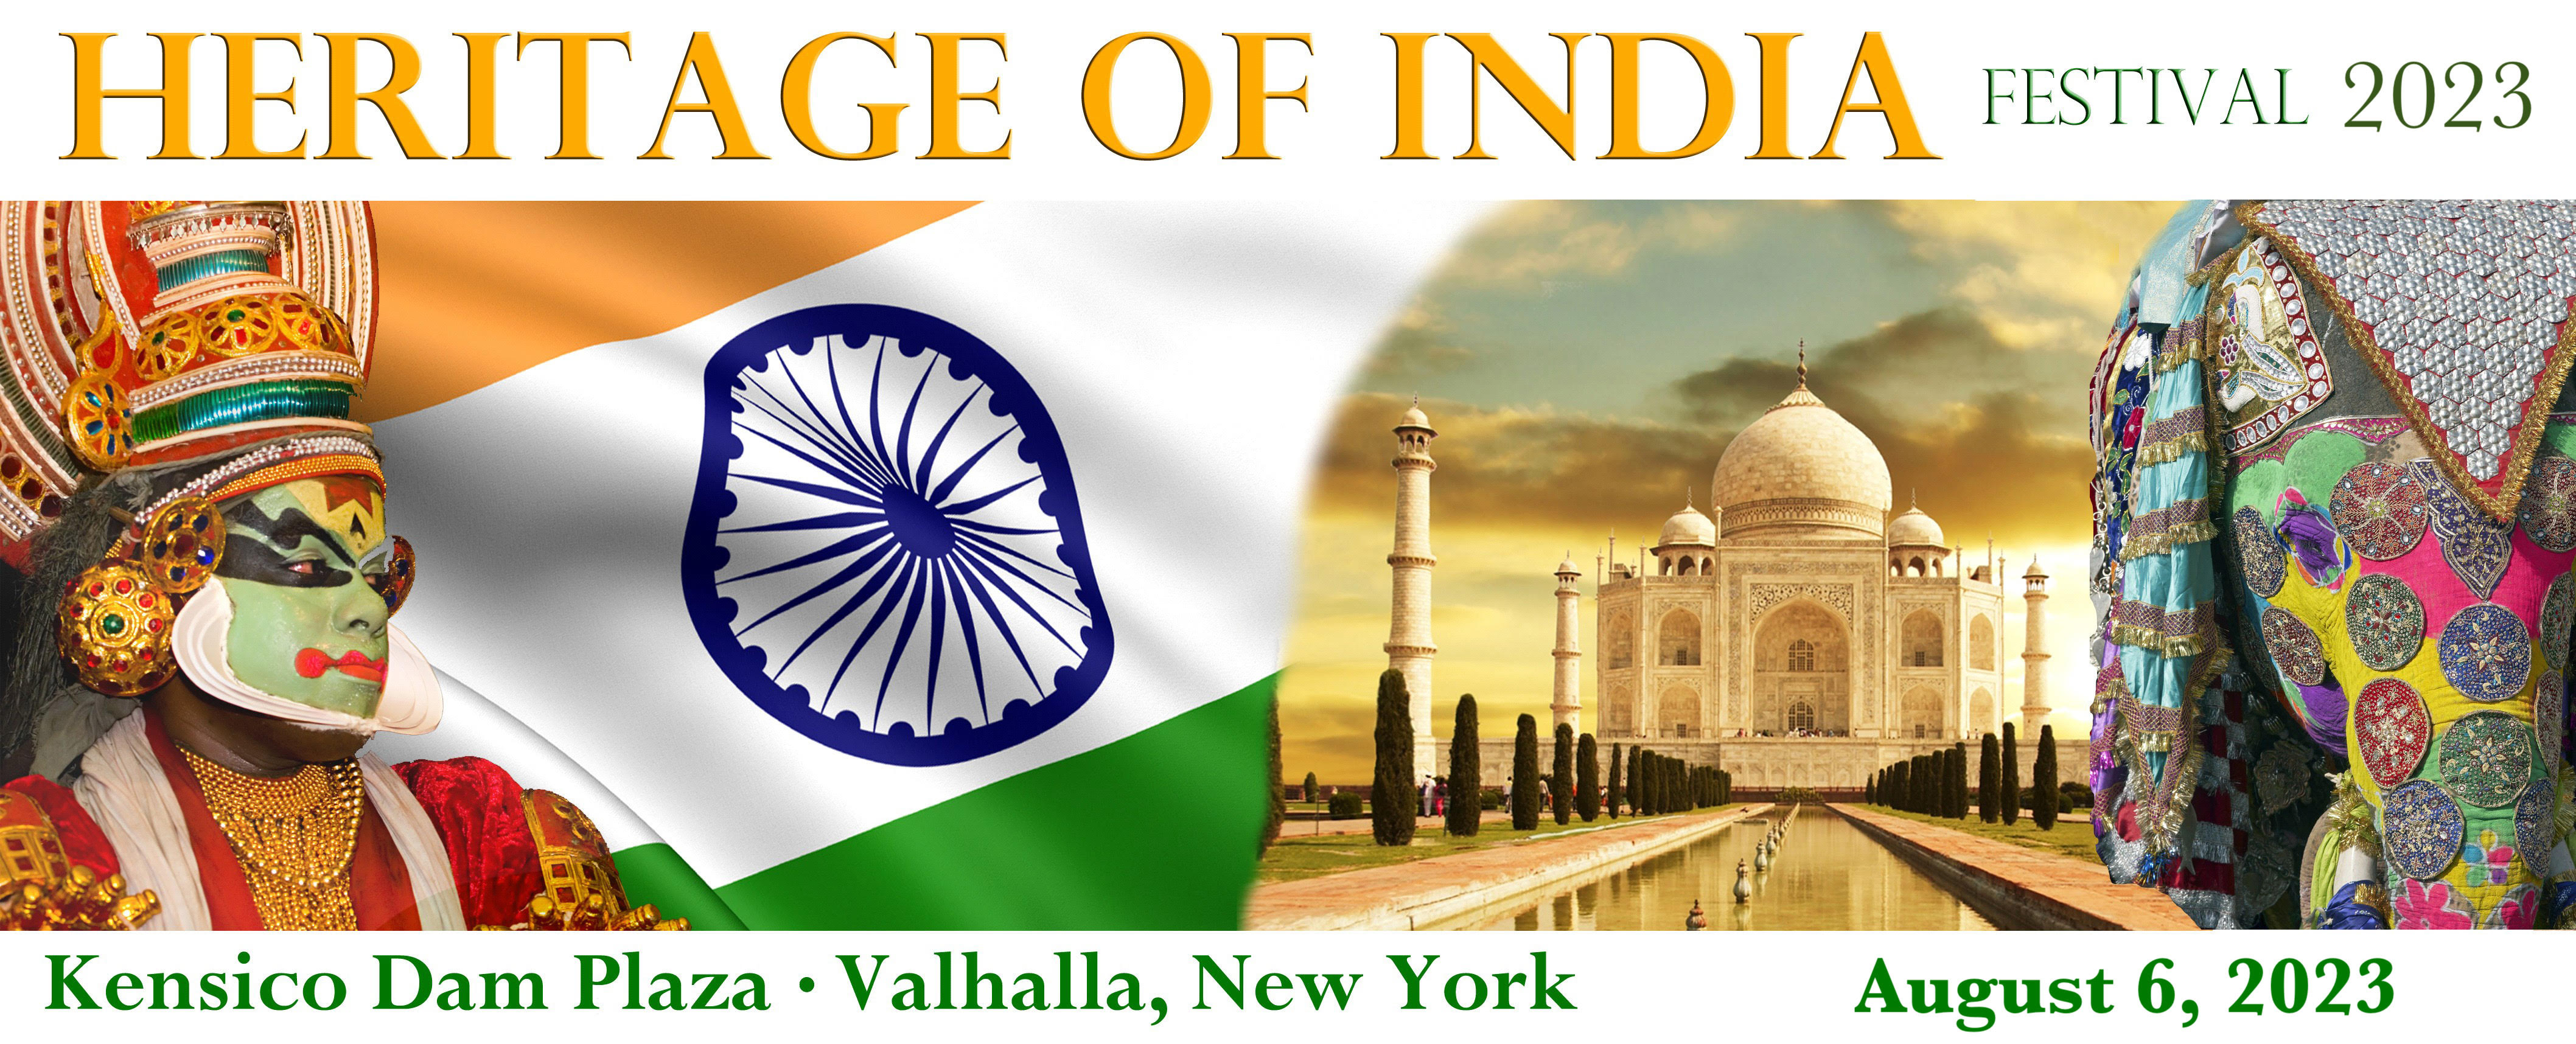 Image-on-flyer-of-23rd-Heritage-Festival-of-India-to-be-held-in-Westchester-NY-Aug.-6-2023.-PHOTO-courtesy-IACAW.jpg